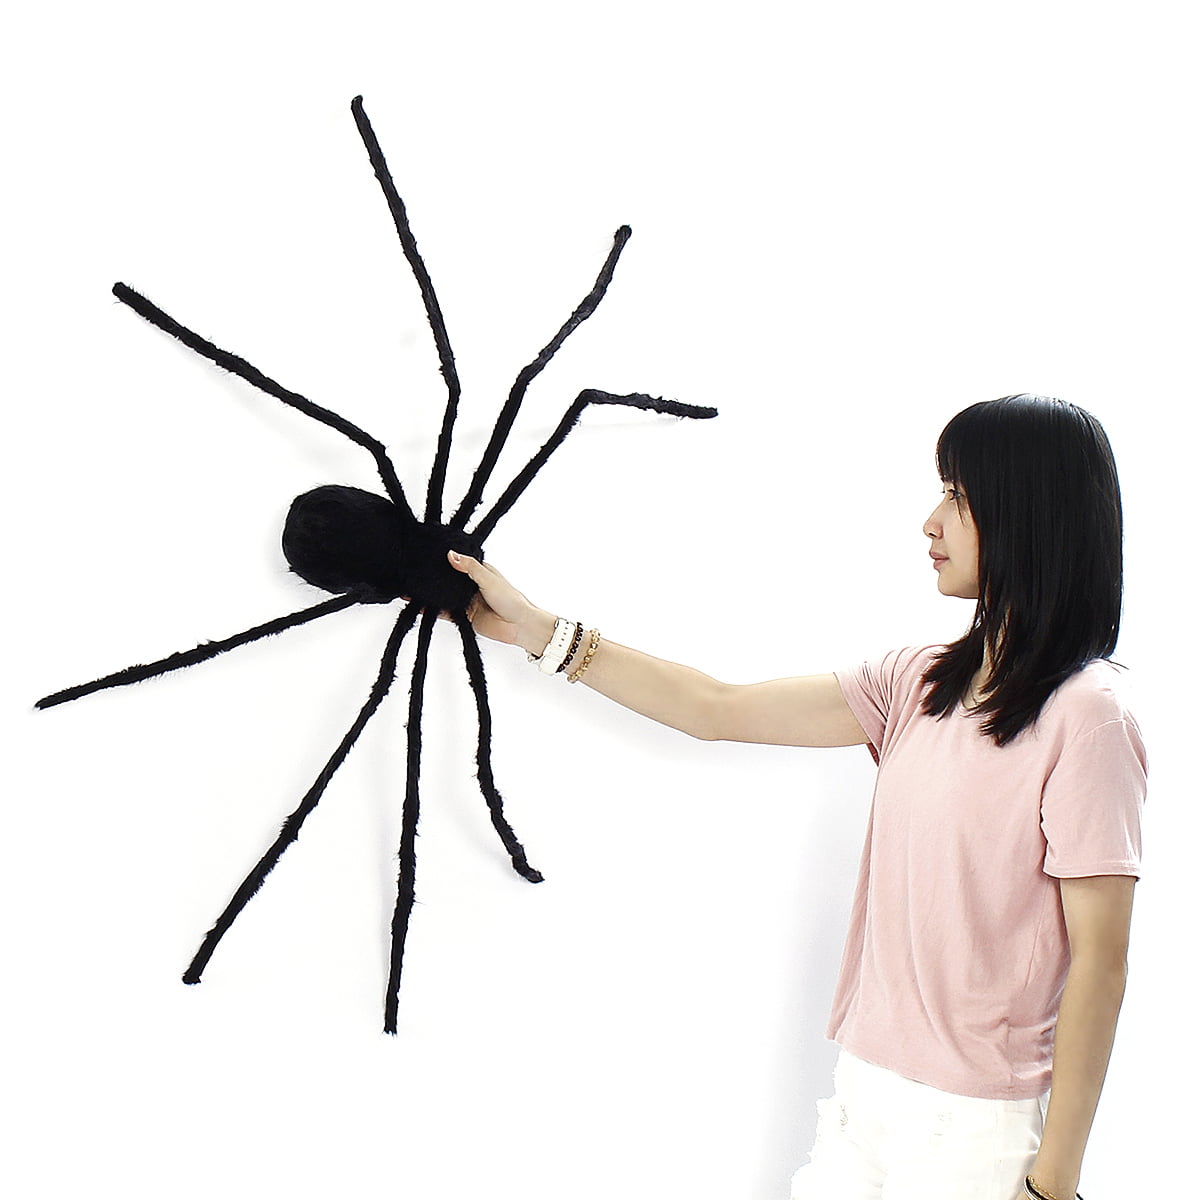 NIP HALLOWEEN SCARY GIANT LAWN SPIDER or 3 SPOOKY HANGING SPIDERS SPIDERS 